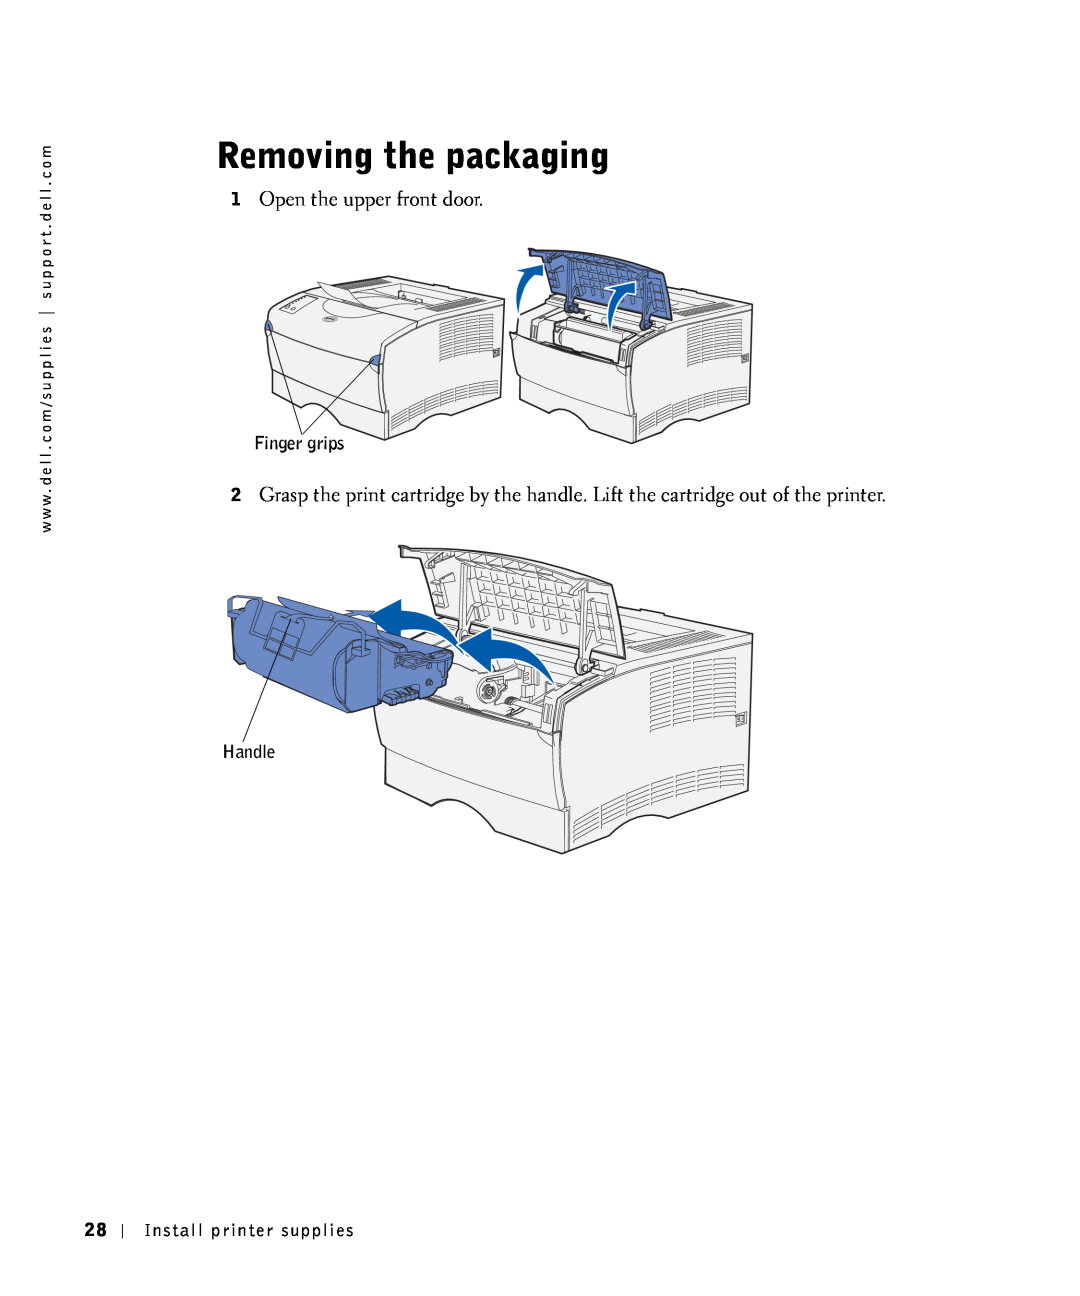 Dell S2500 owner manual Removing the packaging, Open the upper front door, Finger grips, Handle, Install printer supplies 